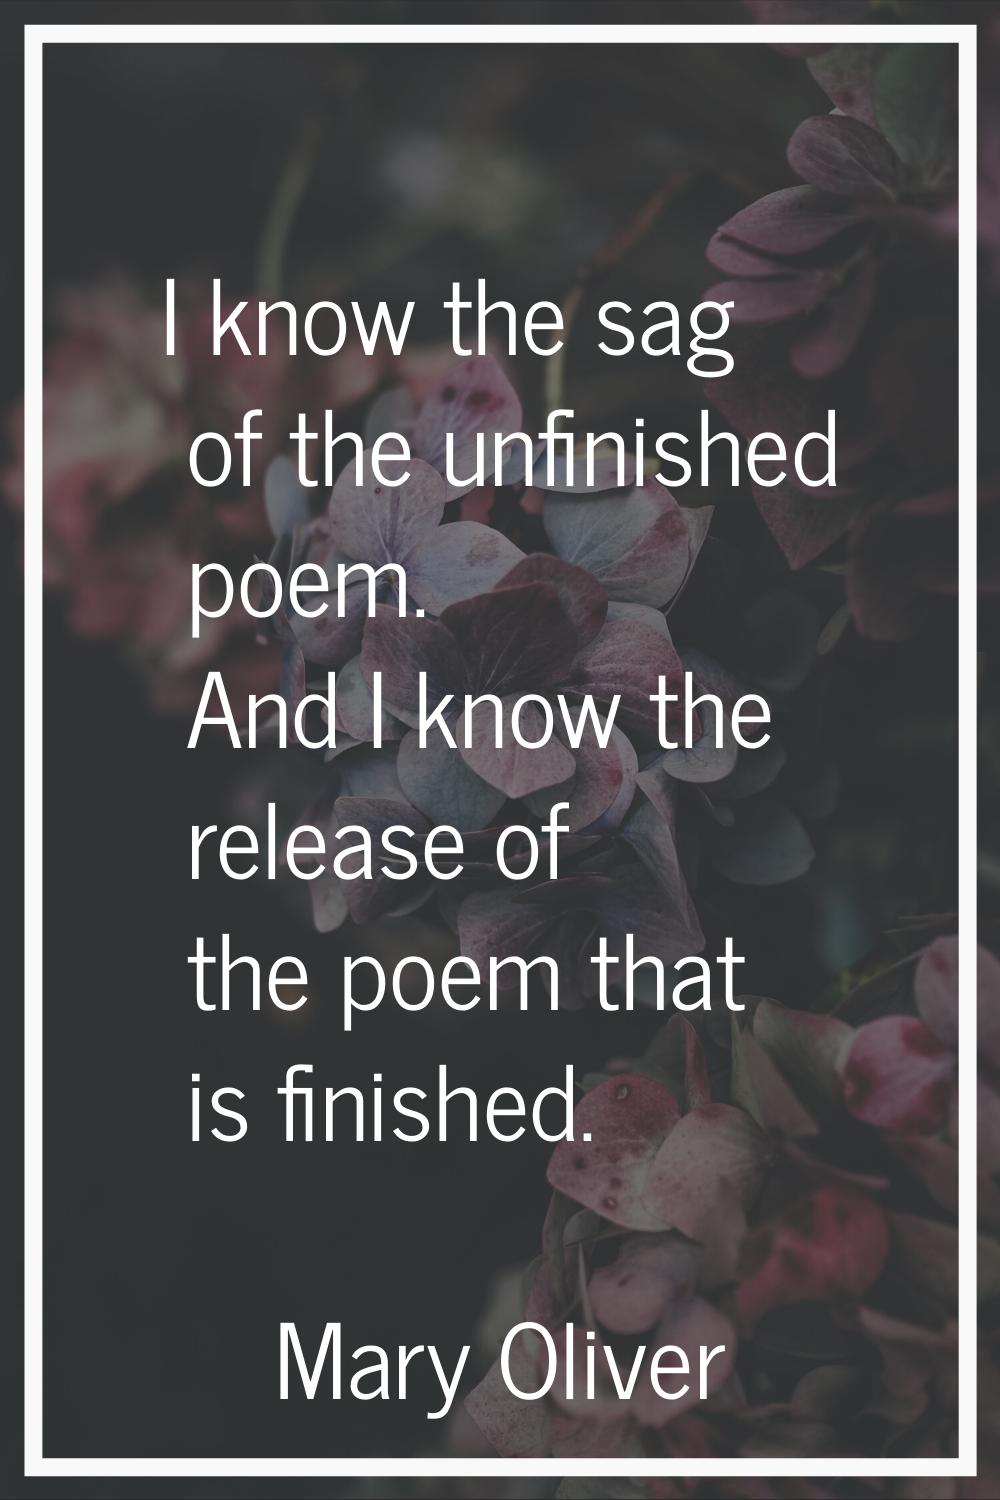 I know the sag of the unfinished poem. And I know the release of the poem that is finished.